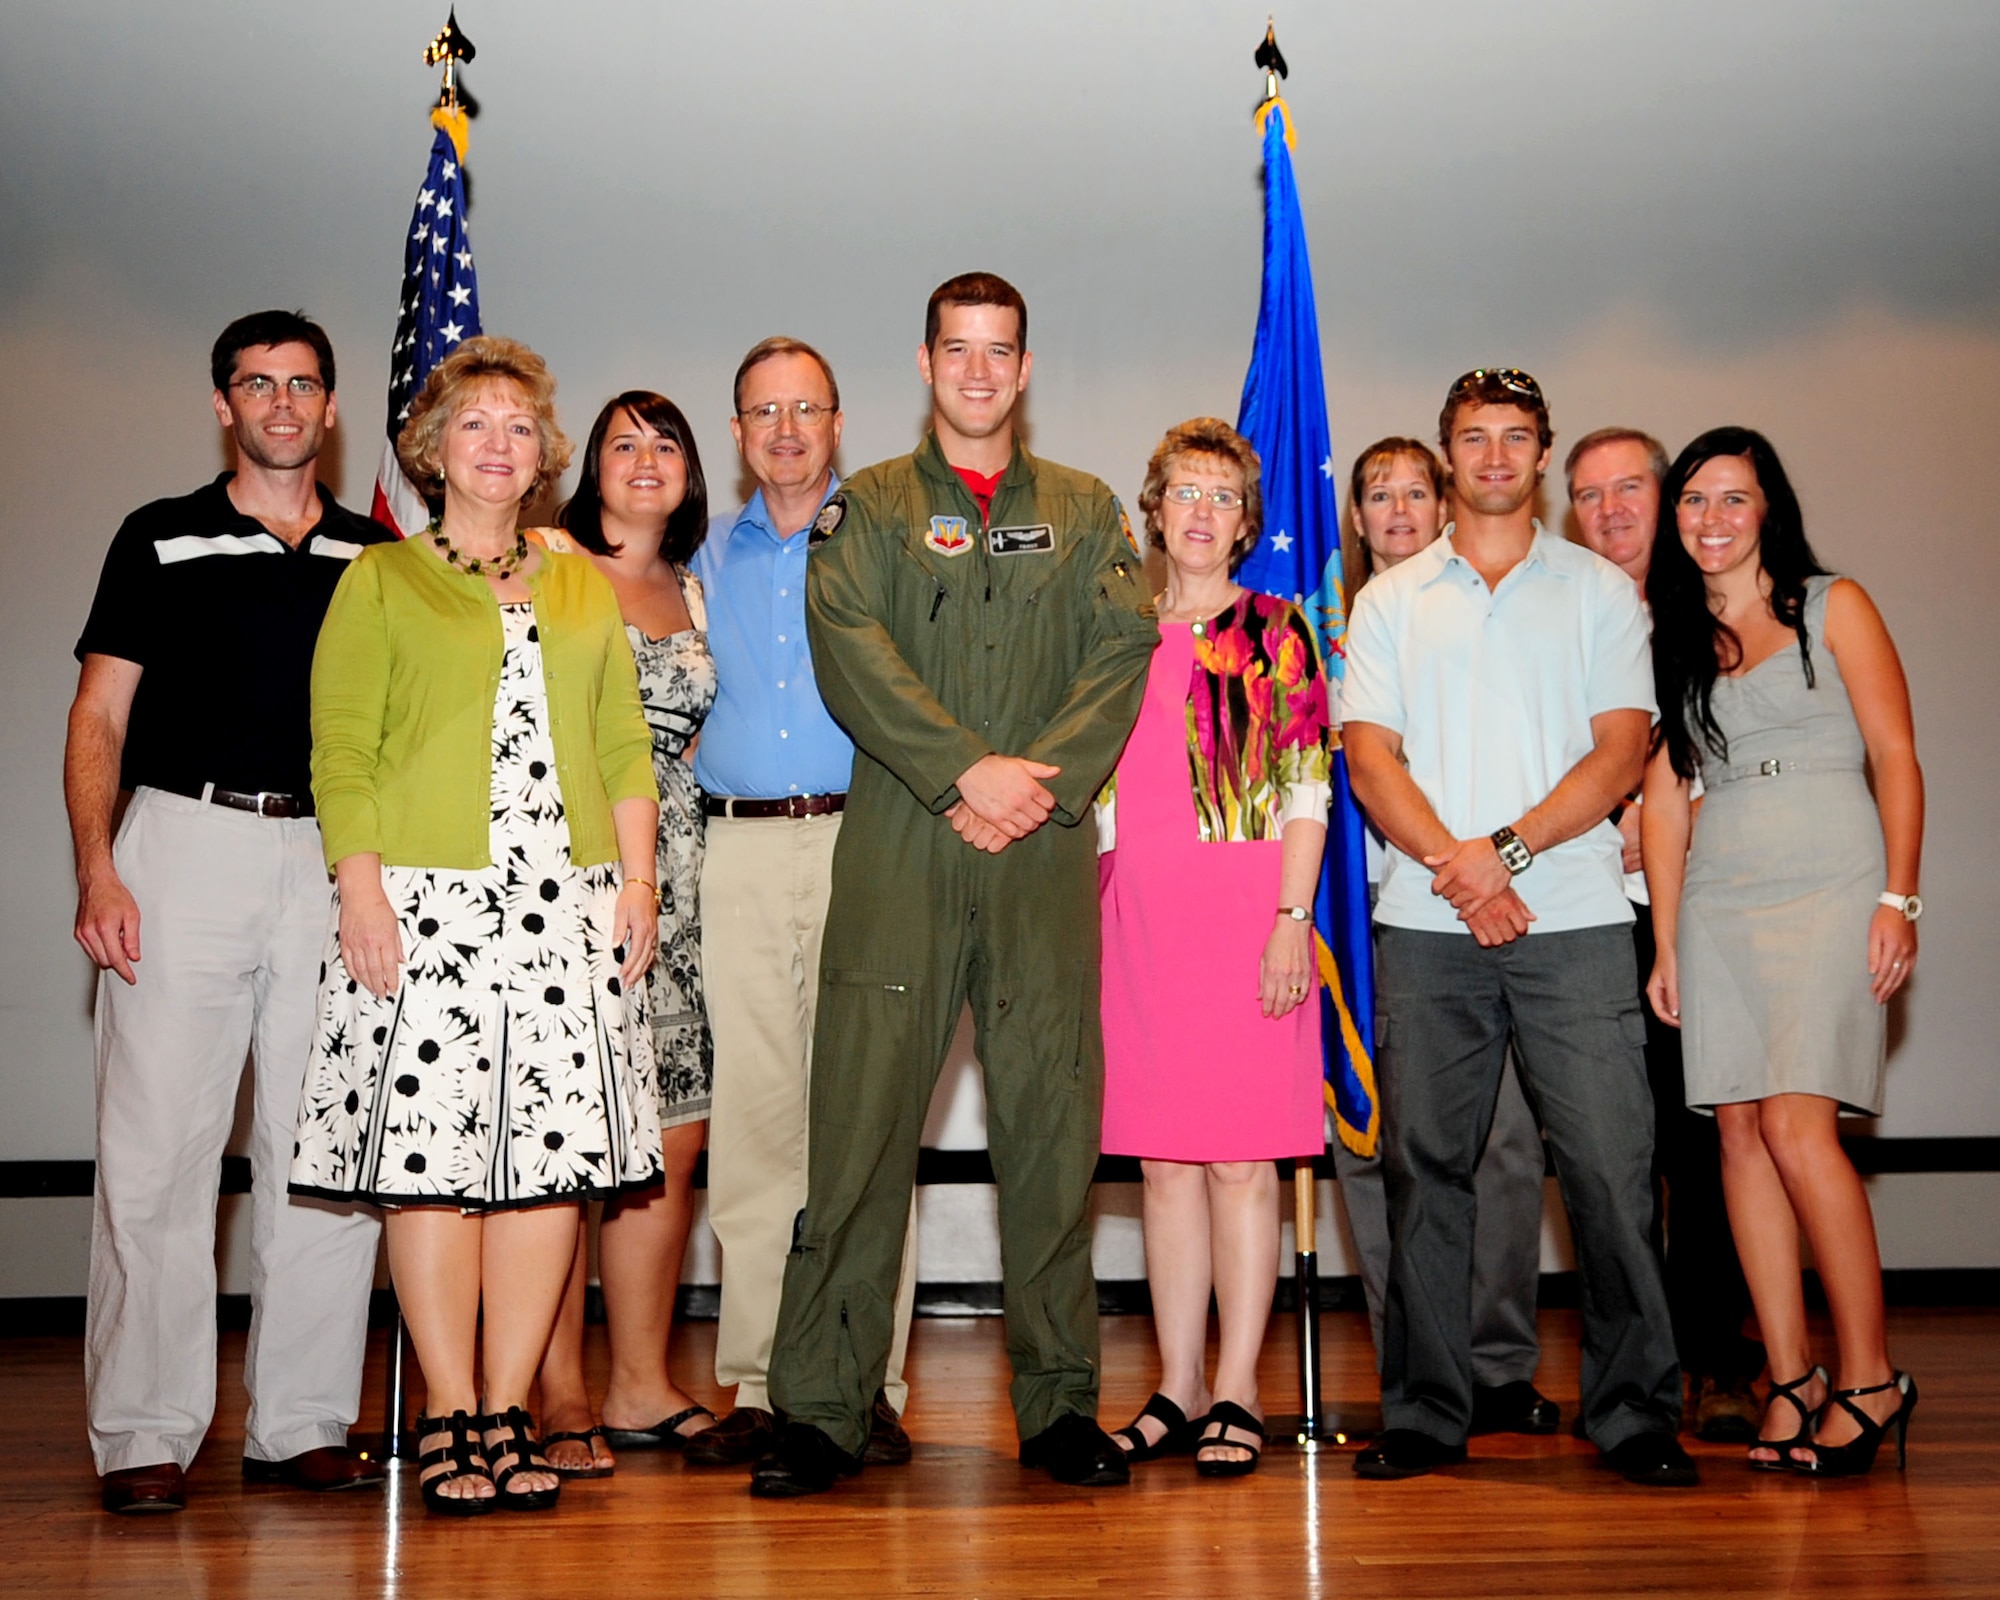 1st Lt. Dan Griffin, center, poses with his family after the graduation ceremony for A-10C Pilot Initial Qualification Course Class 10-BBD at the base theater here Aug. 13, 2010. Lieutenant Griffin was one of 12 students to most recently complete the 27-week training course, becoming the Air Force’s newest A-10C pilots. (U.S. Air Force photo/Airman 1st Class Jerilyn Quintanilla)